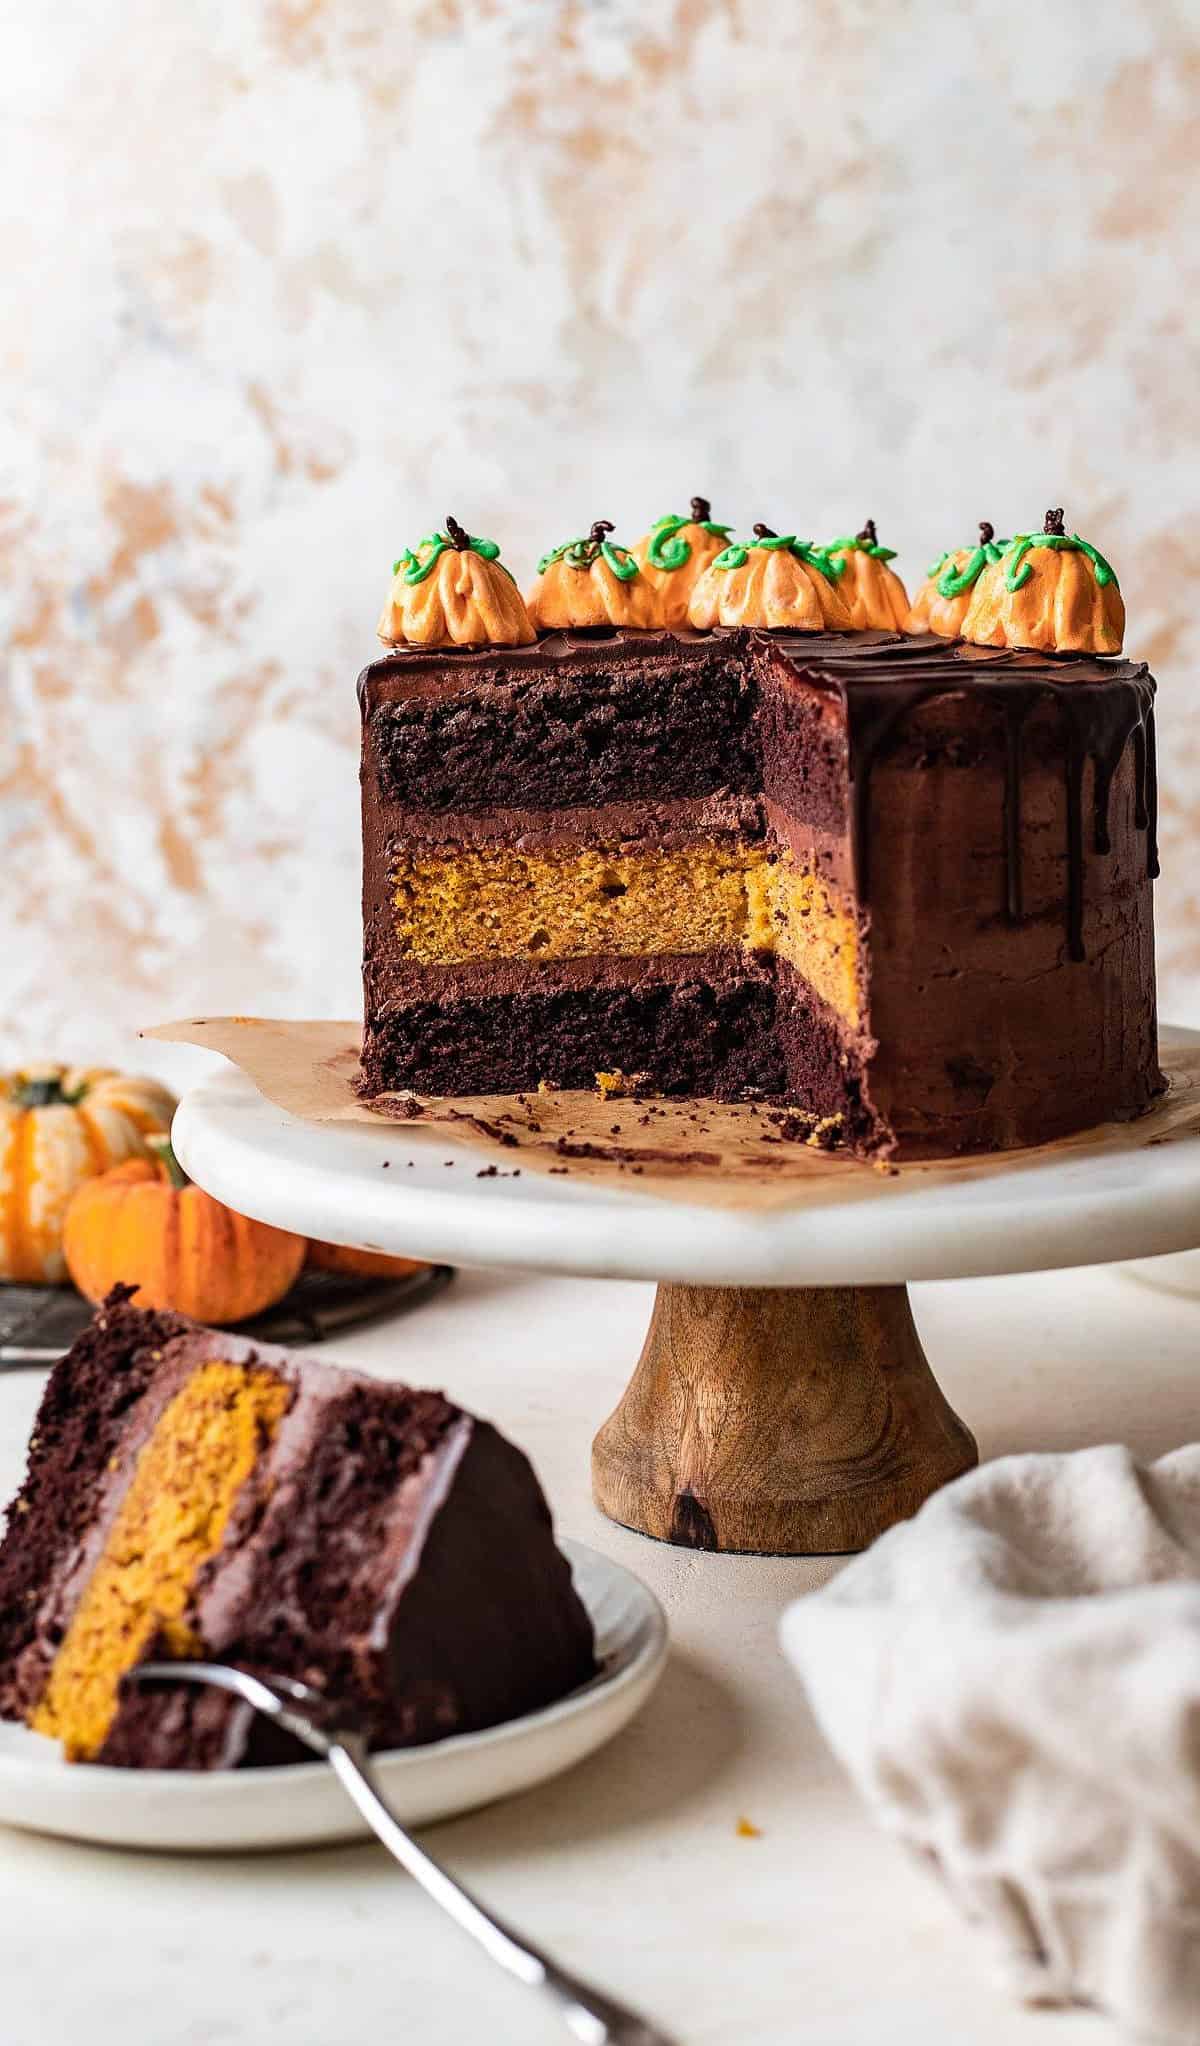  This cake is the perfect combination of decadence and spice.